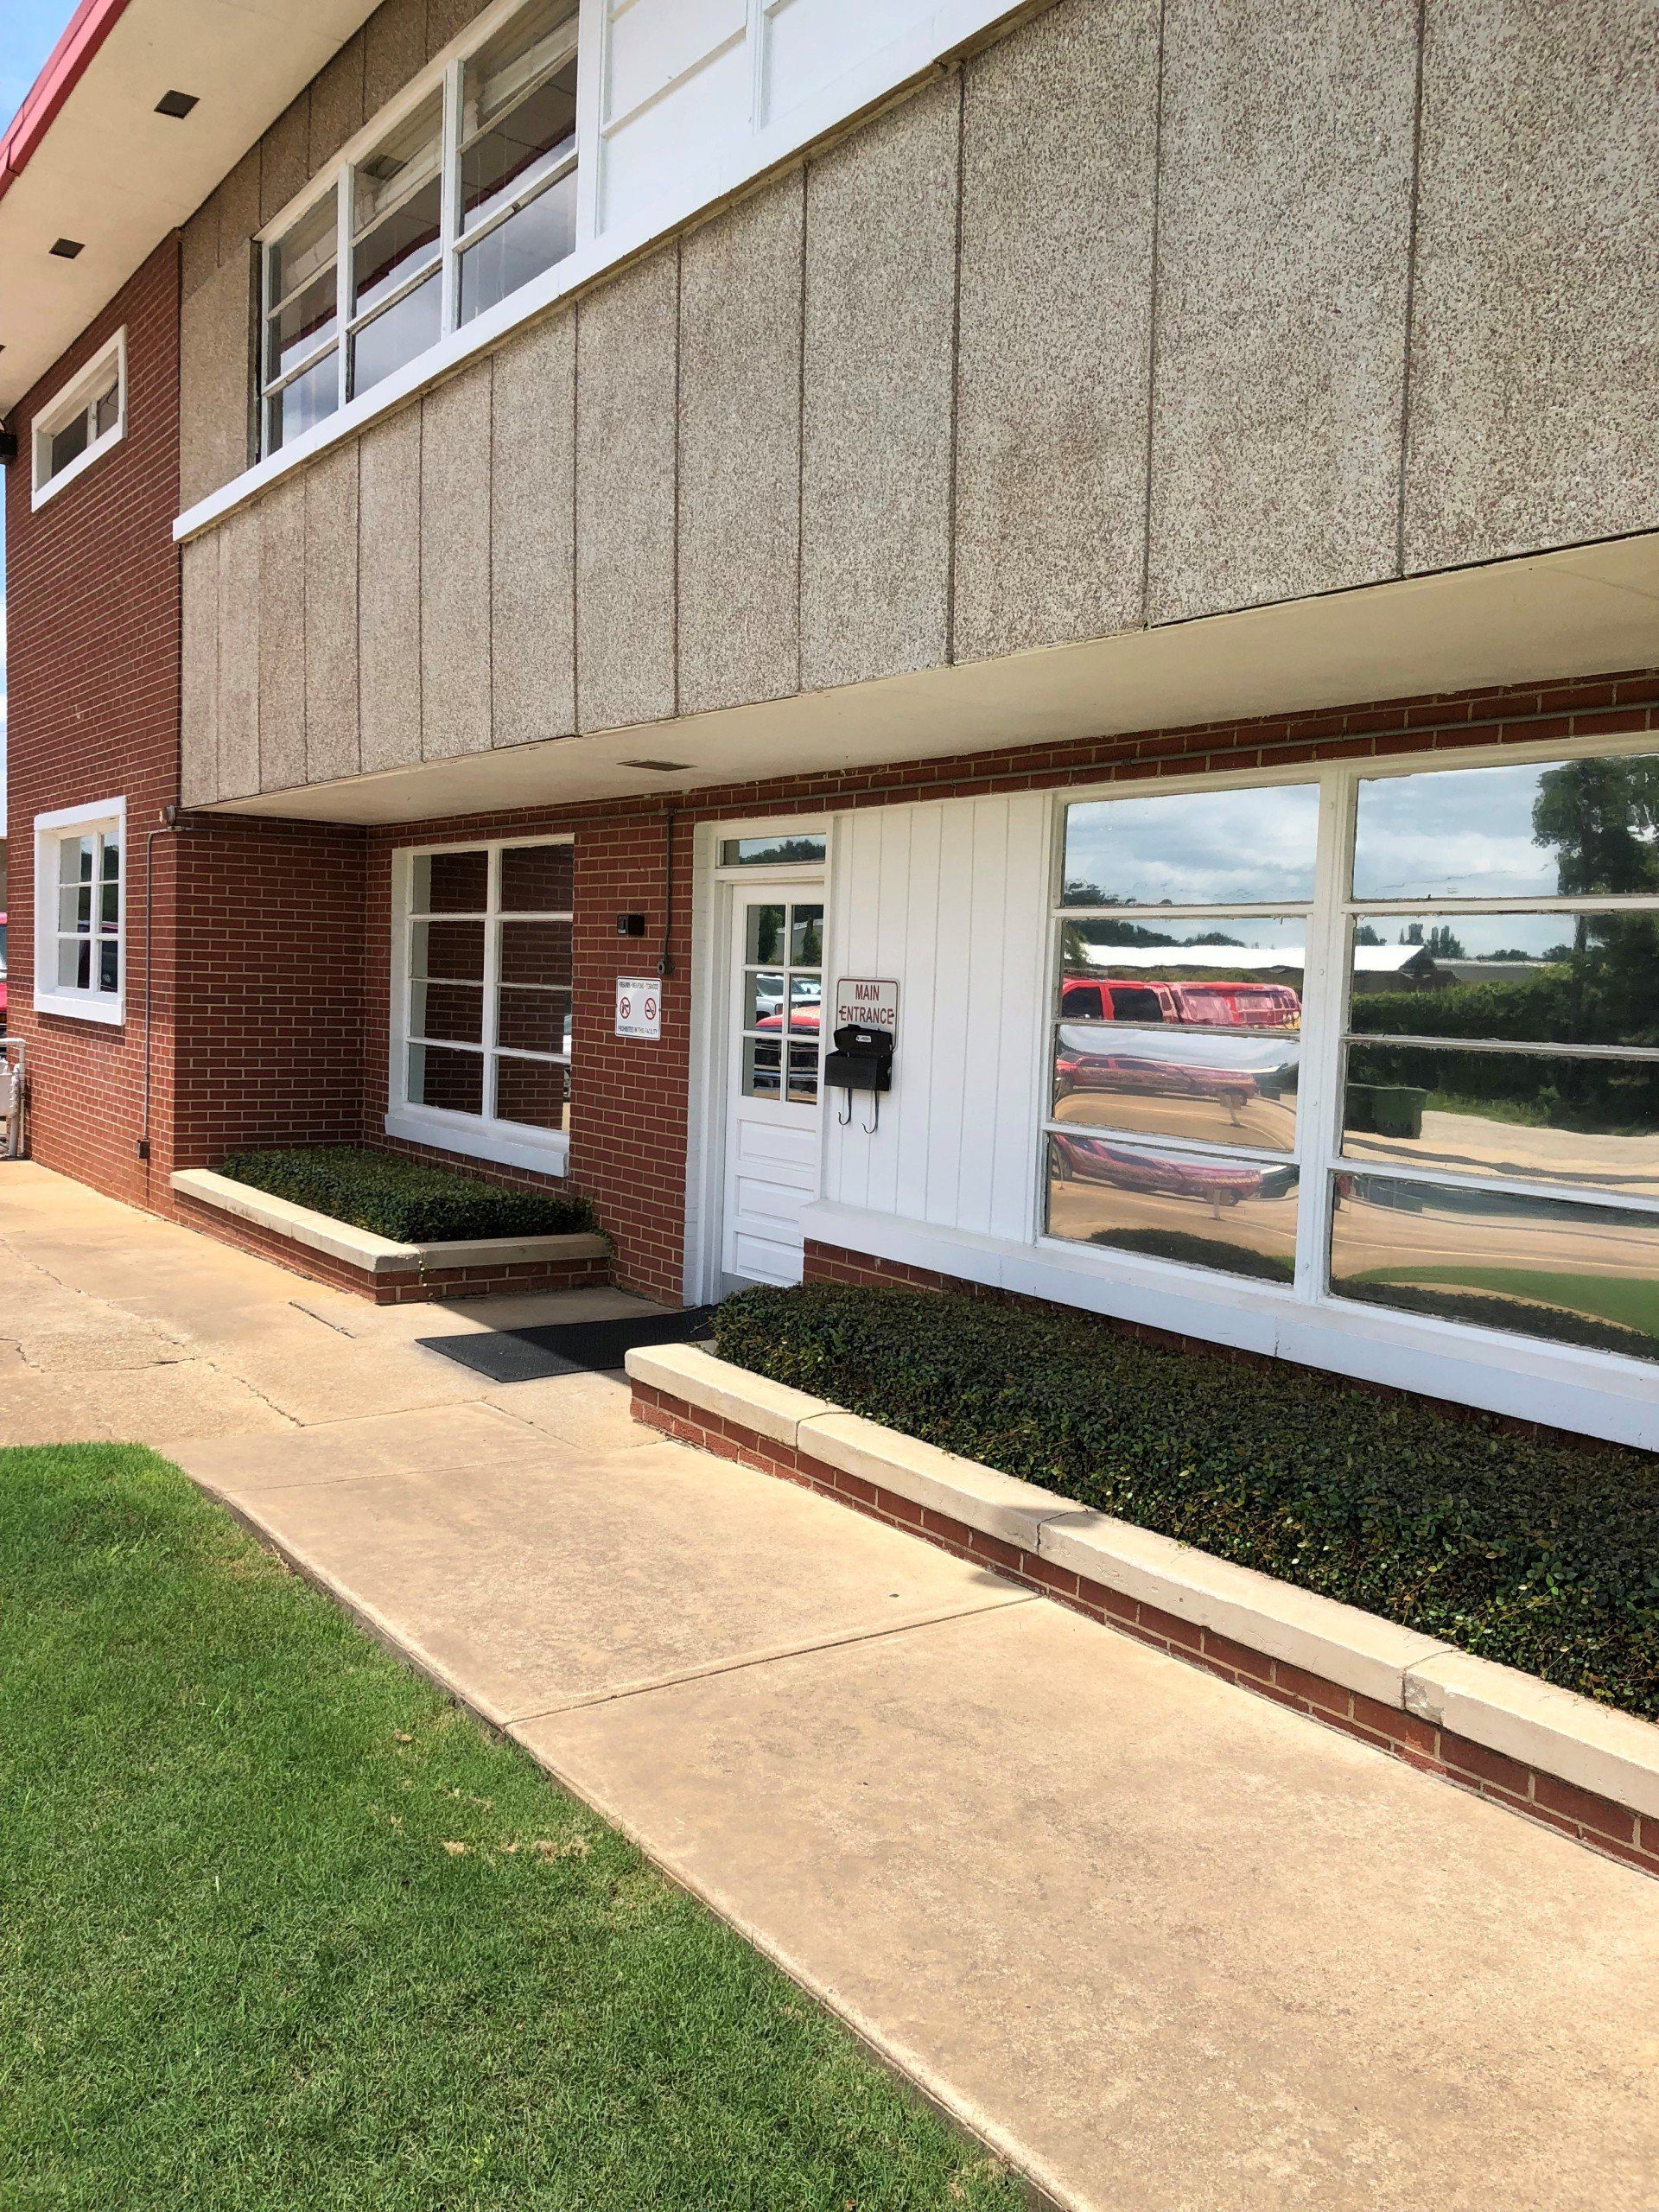 Commercial Tint installed at Montgomery Fire Department - Business Tinted in Montgomery AL - 2018